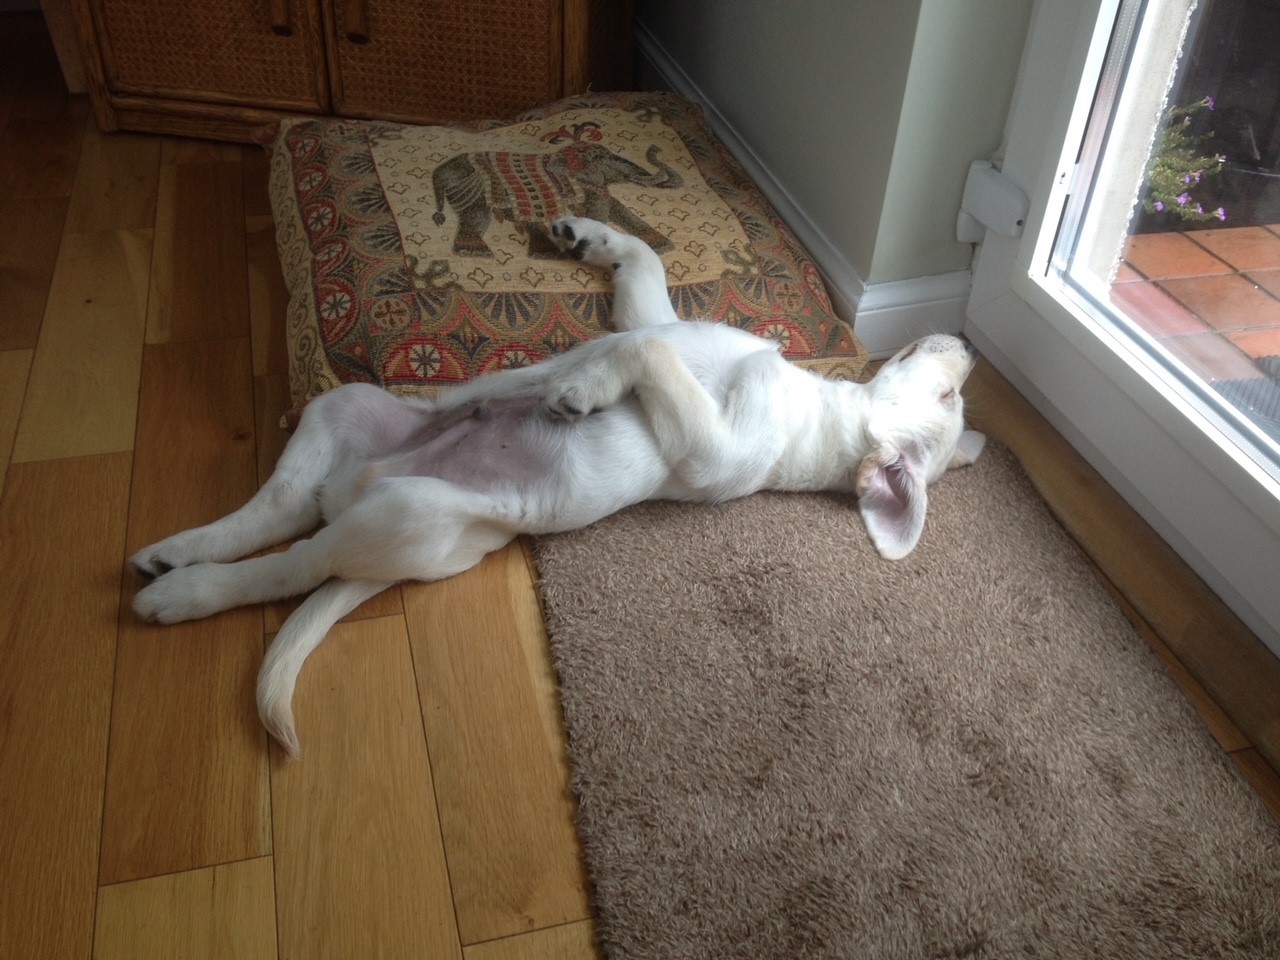 Ringo, a yellow labrador puppy, sleeps stretched out on his back with his belly in the air, his ears hanging back, and his legs sticking up.